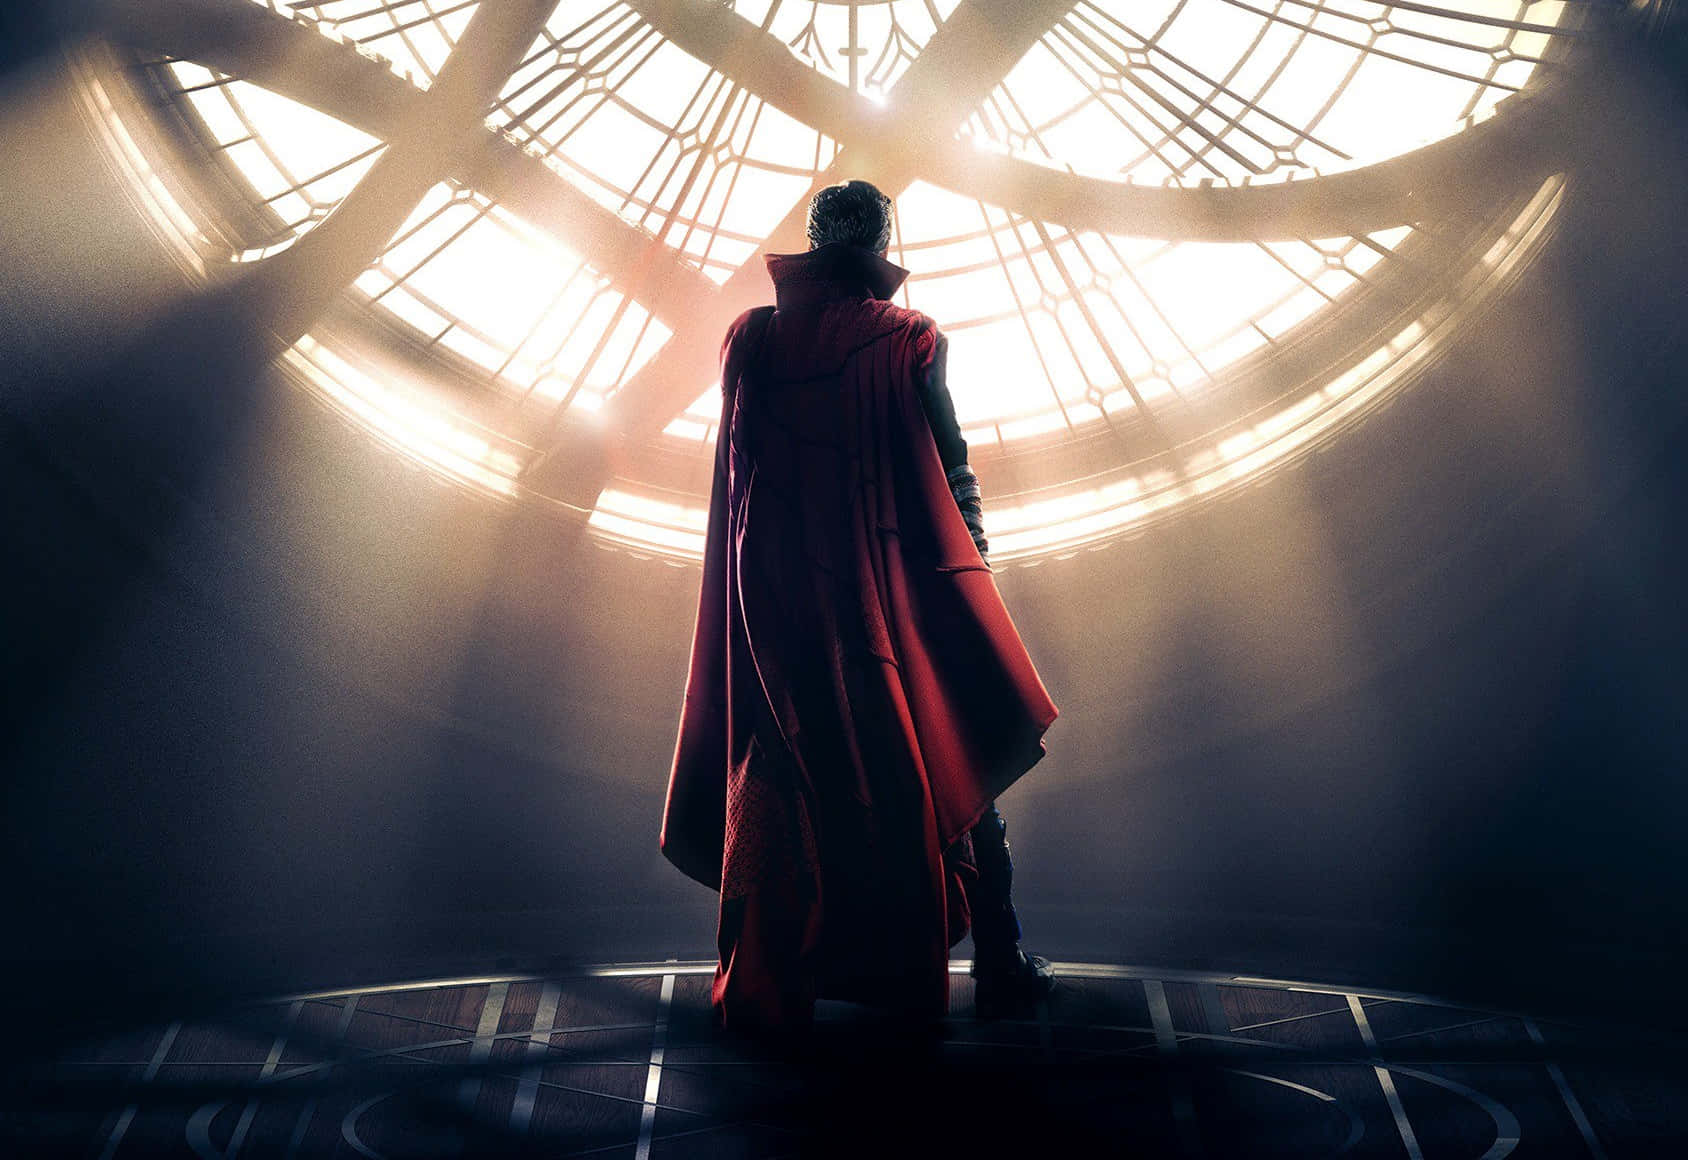 Dr. Stephen Strange is a master of the mystic arts